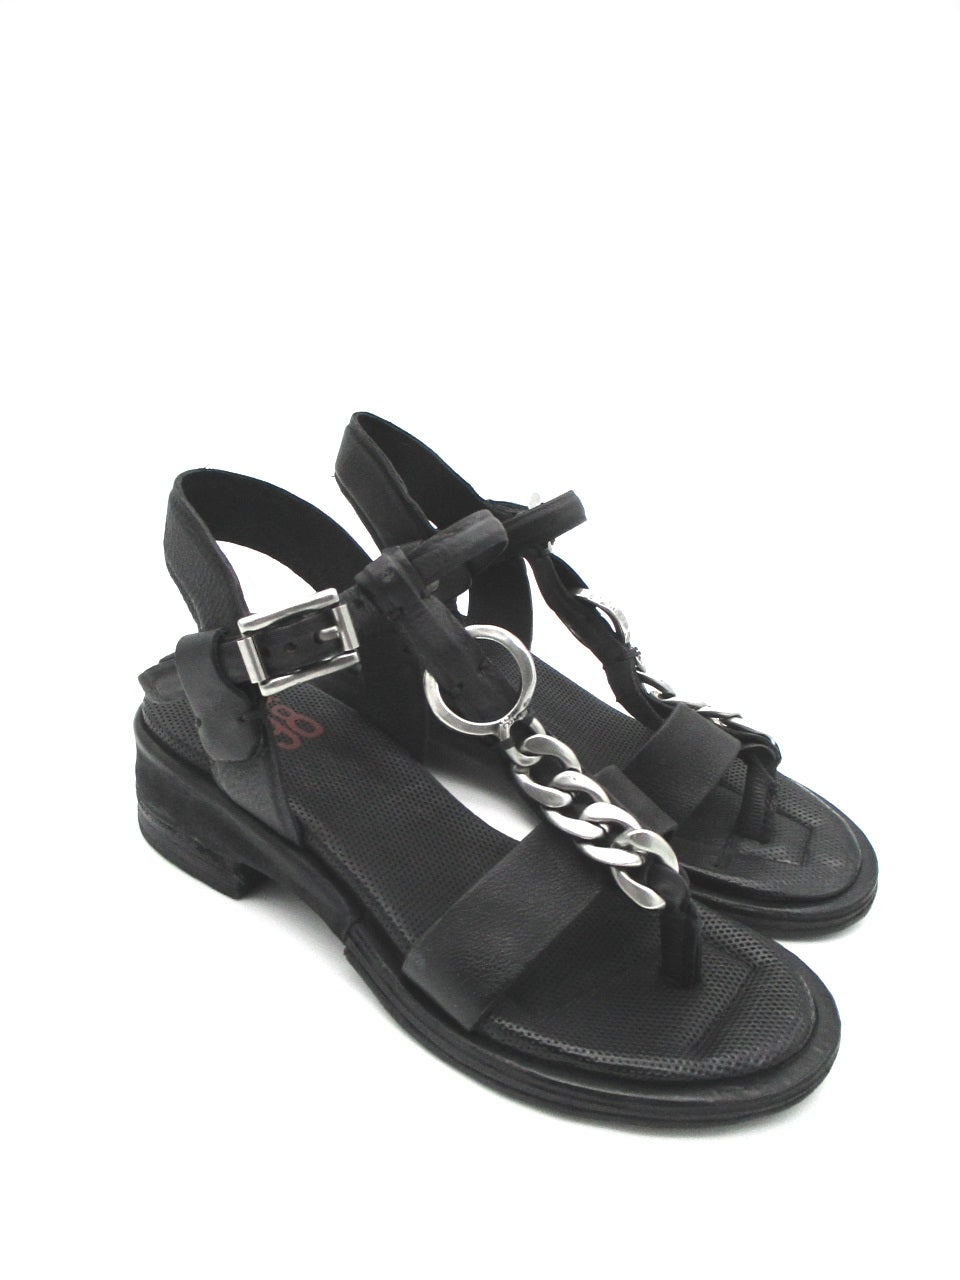 Sandalo tacco in pelle donna As98 A70007 Black